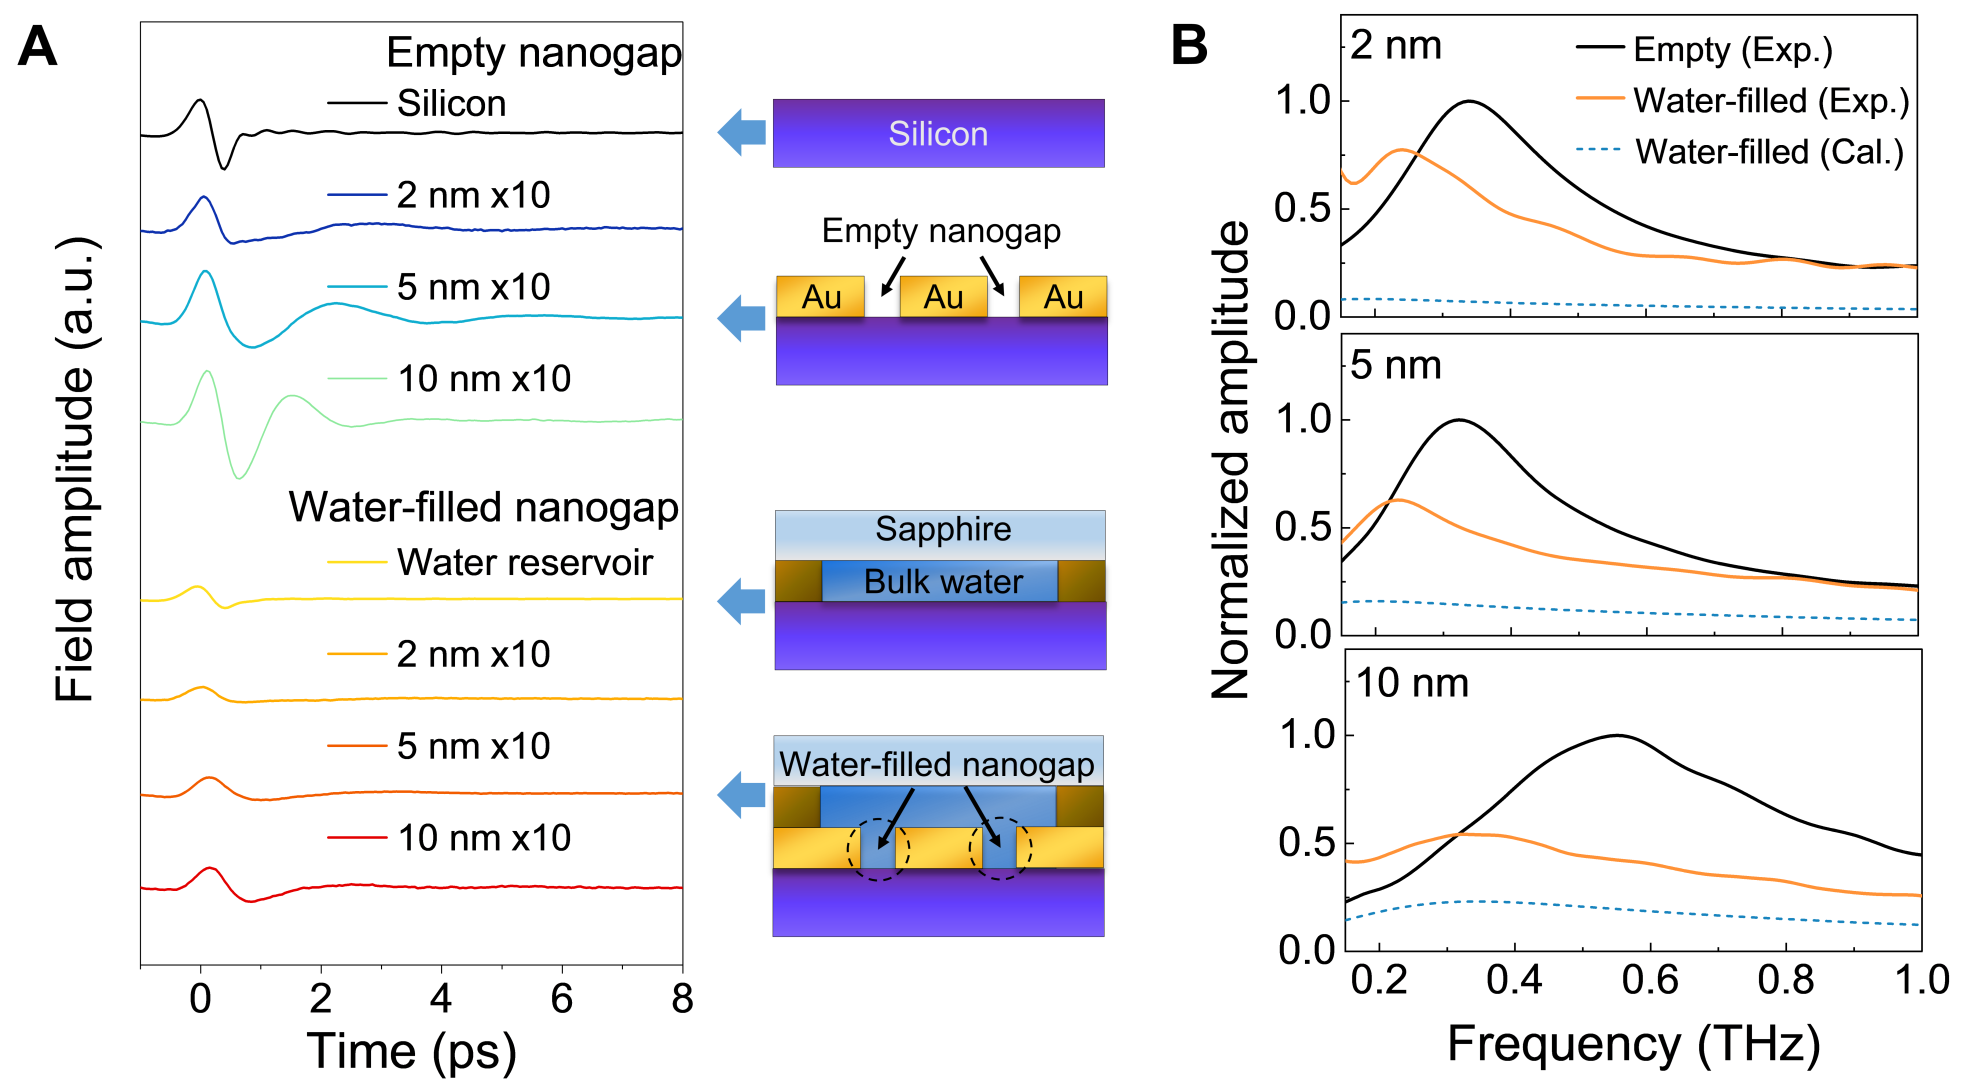 Fig. 3. THz transmissions of empty and water-filled nanogaps with different gap widths